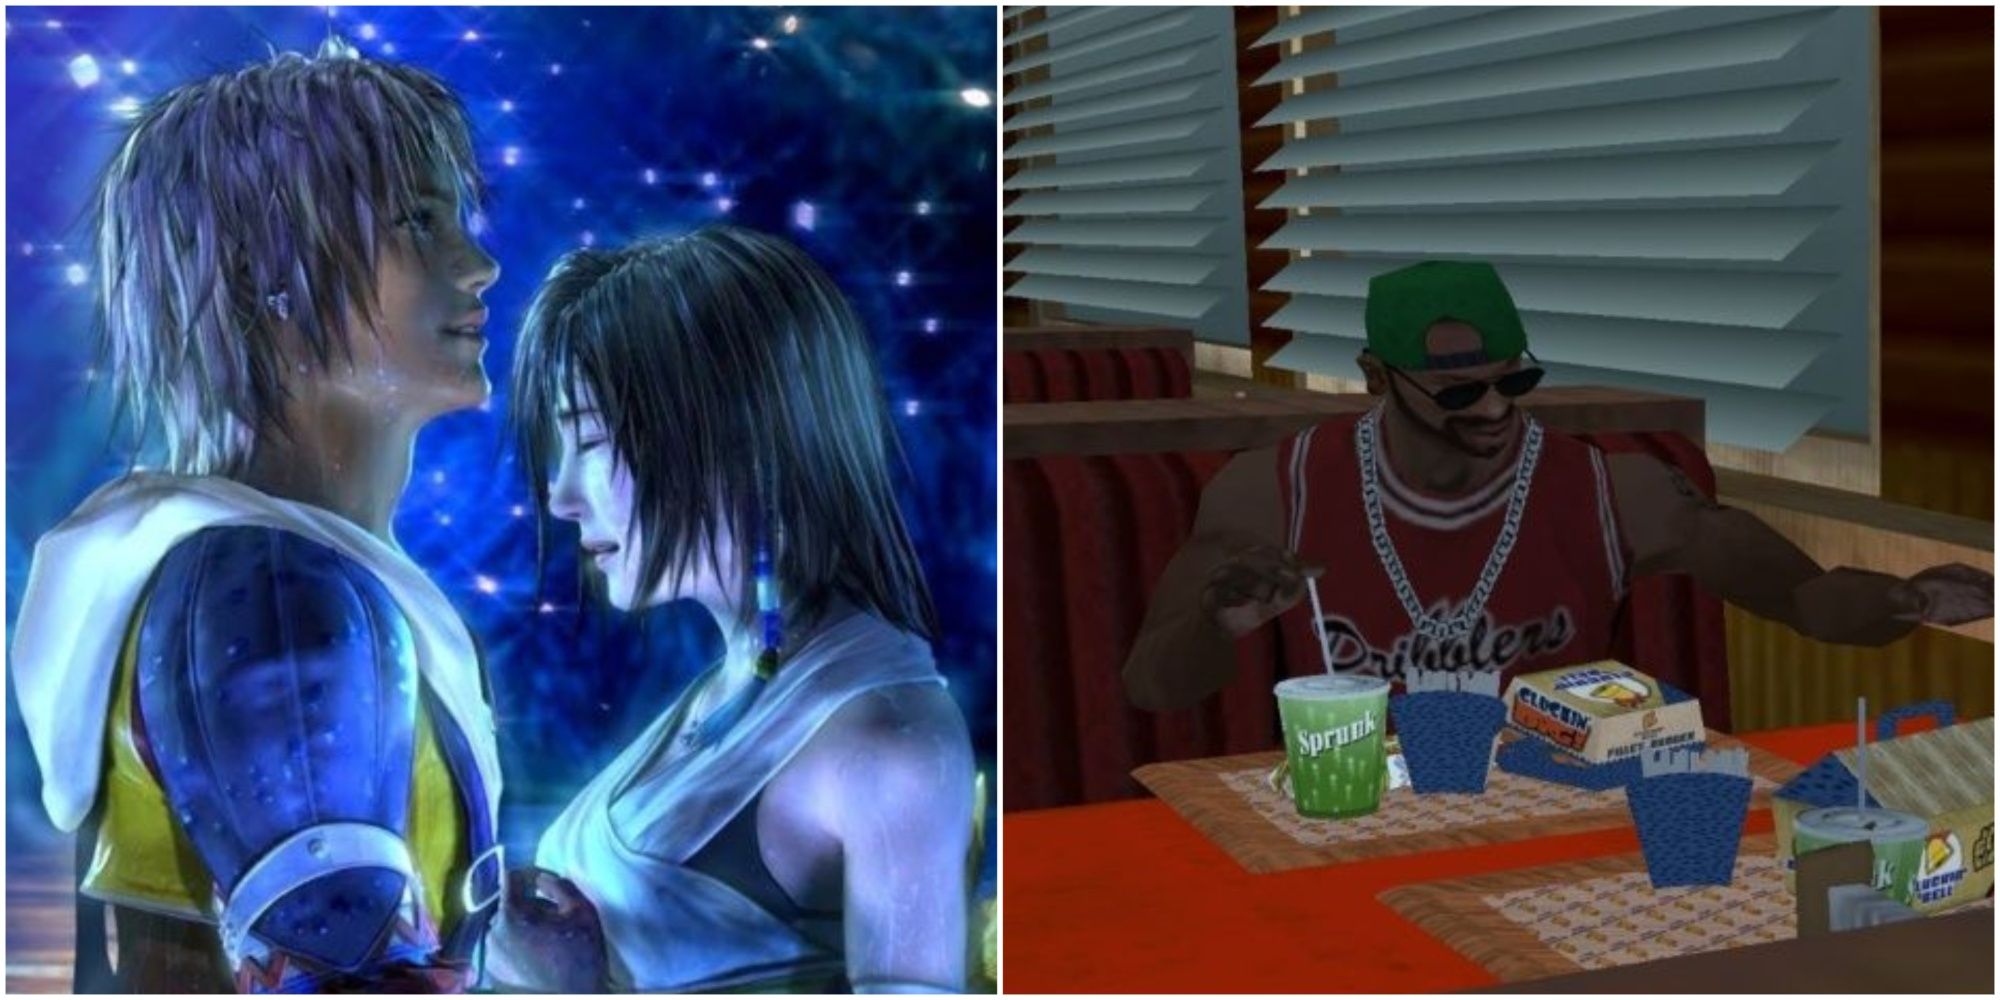 Final Fantasy 10 and Grand Theft Auto San Andreas